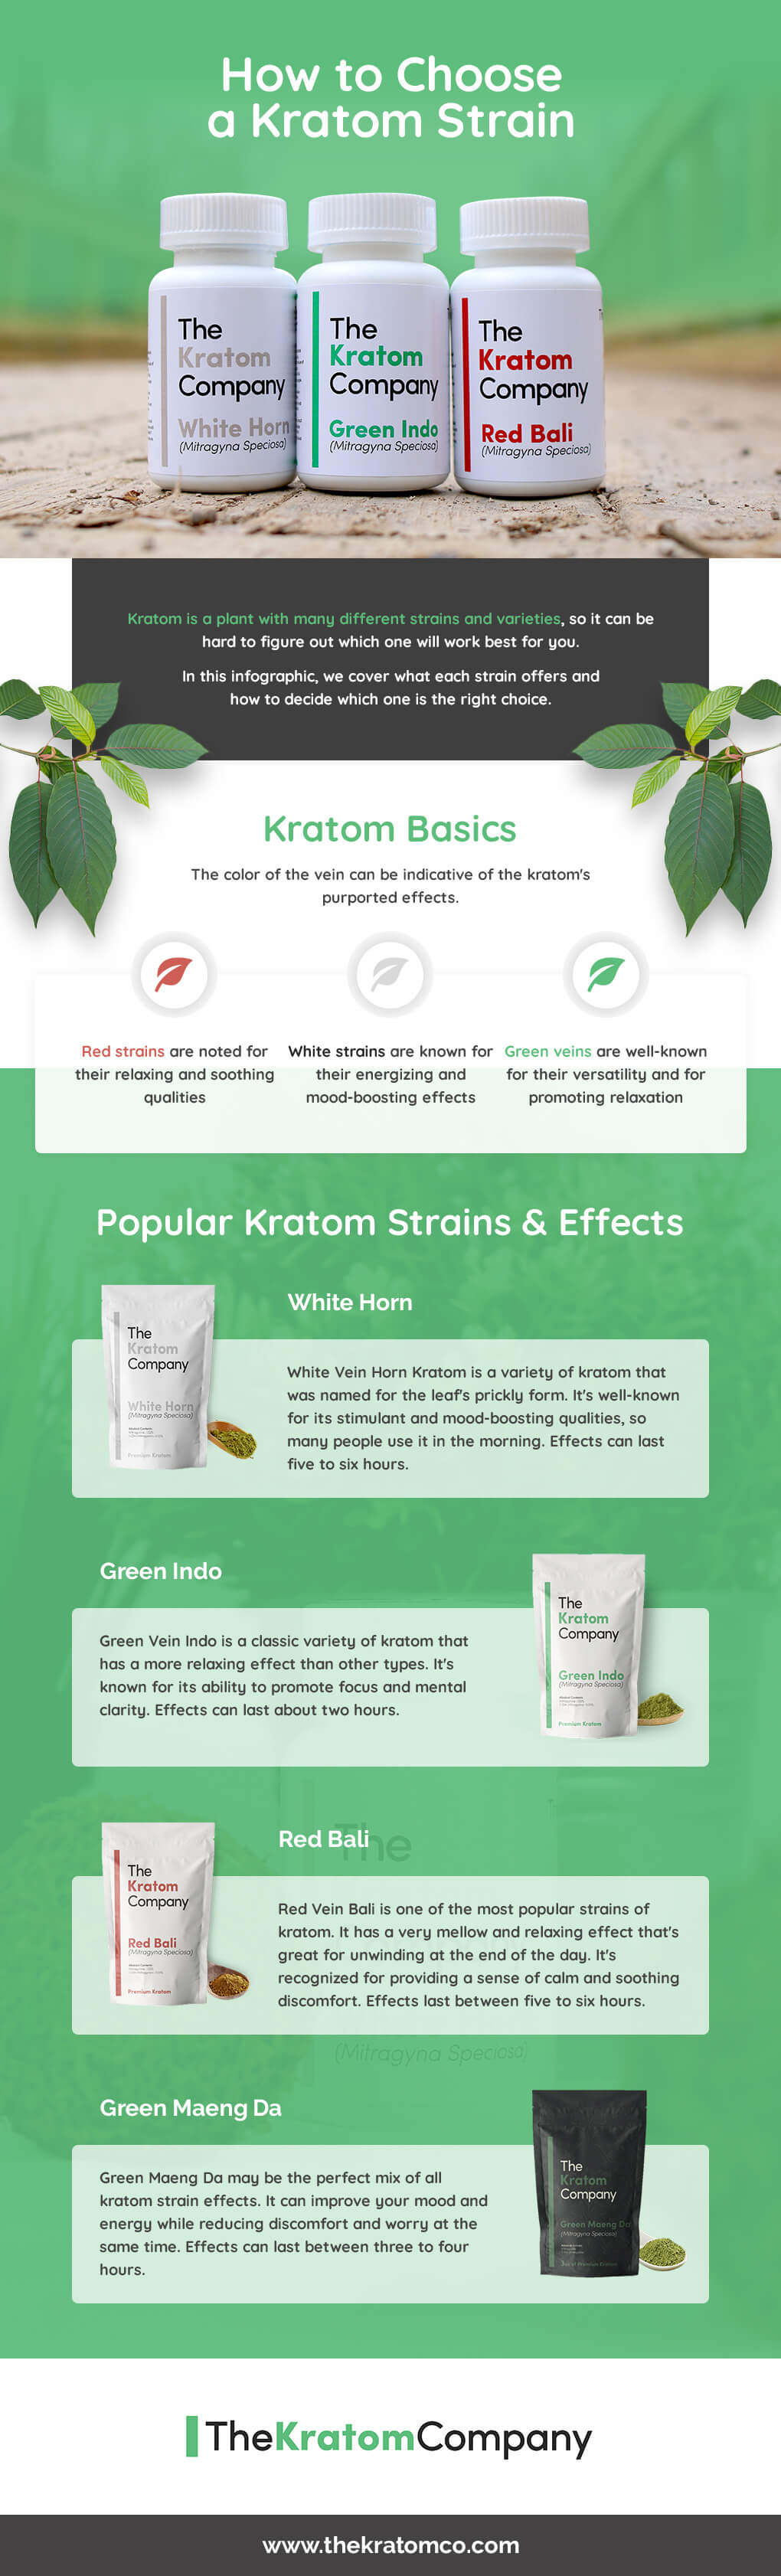 Infographic_How_To_Choose_A_Kratom_Strain_PremiumSupplements